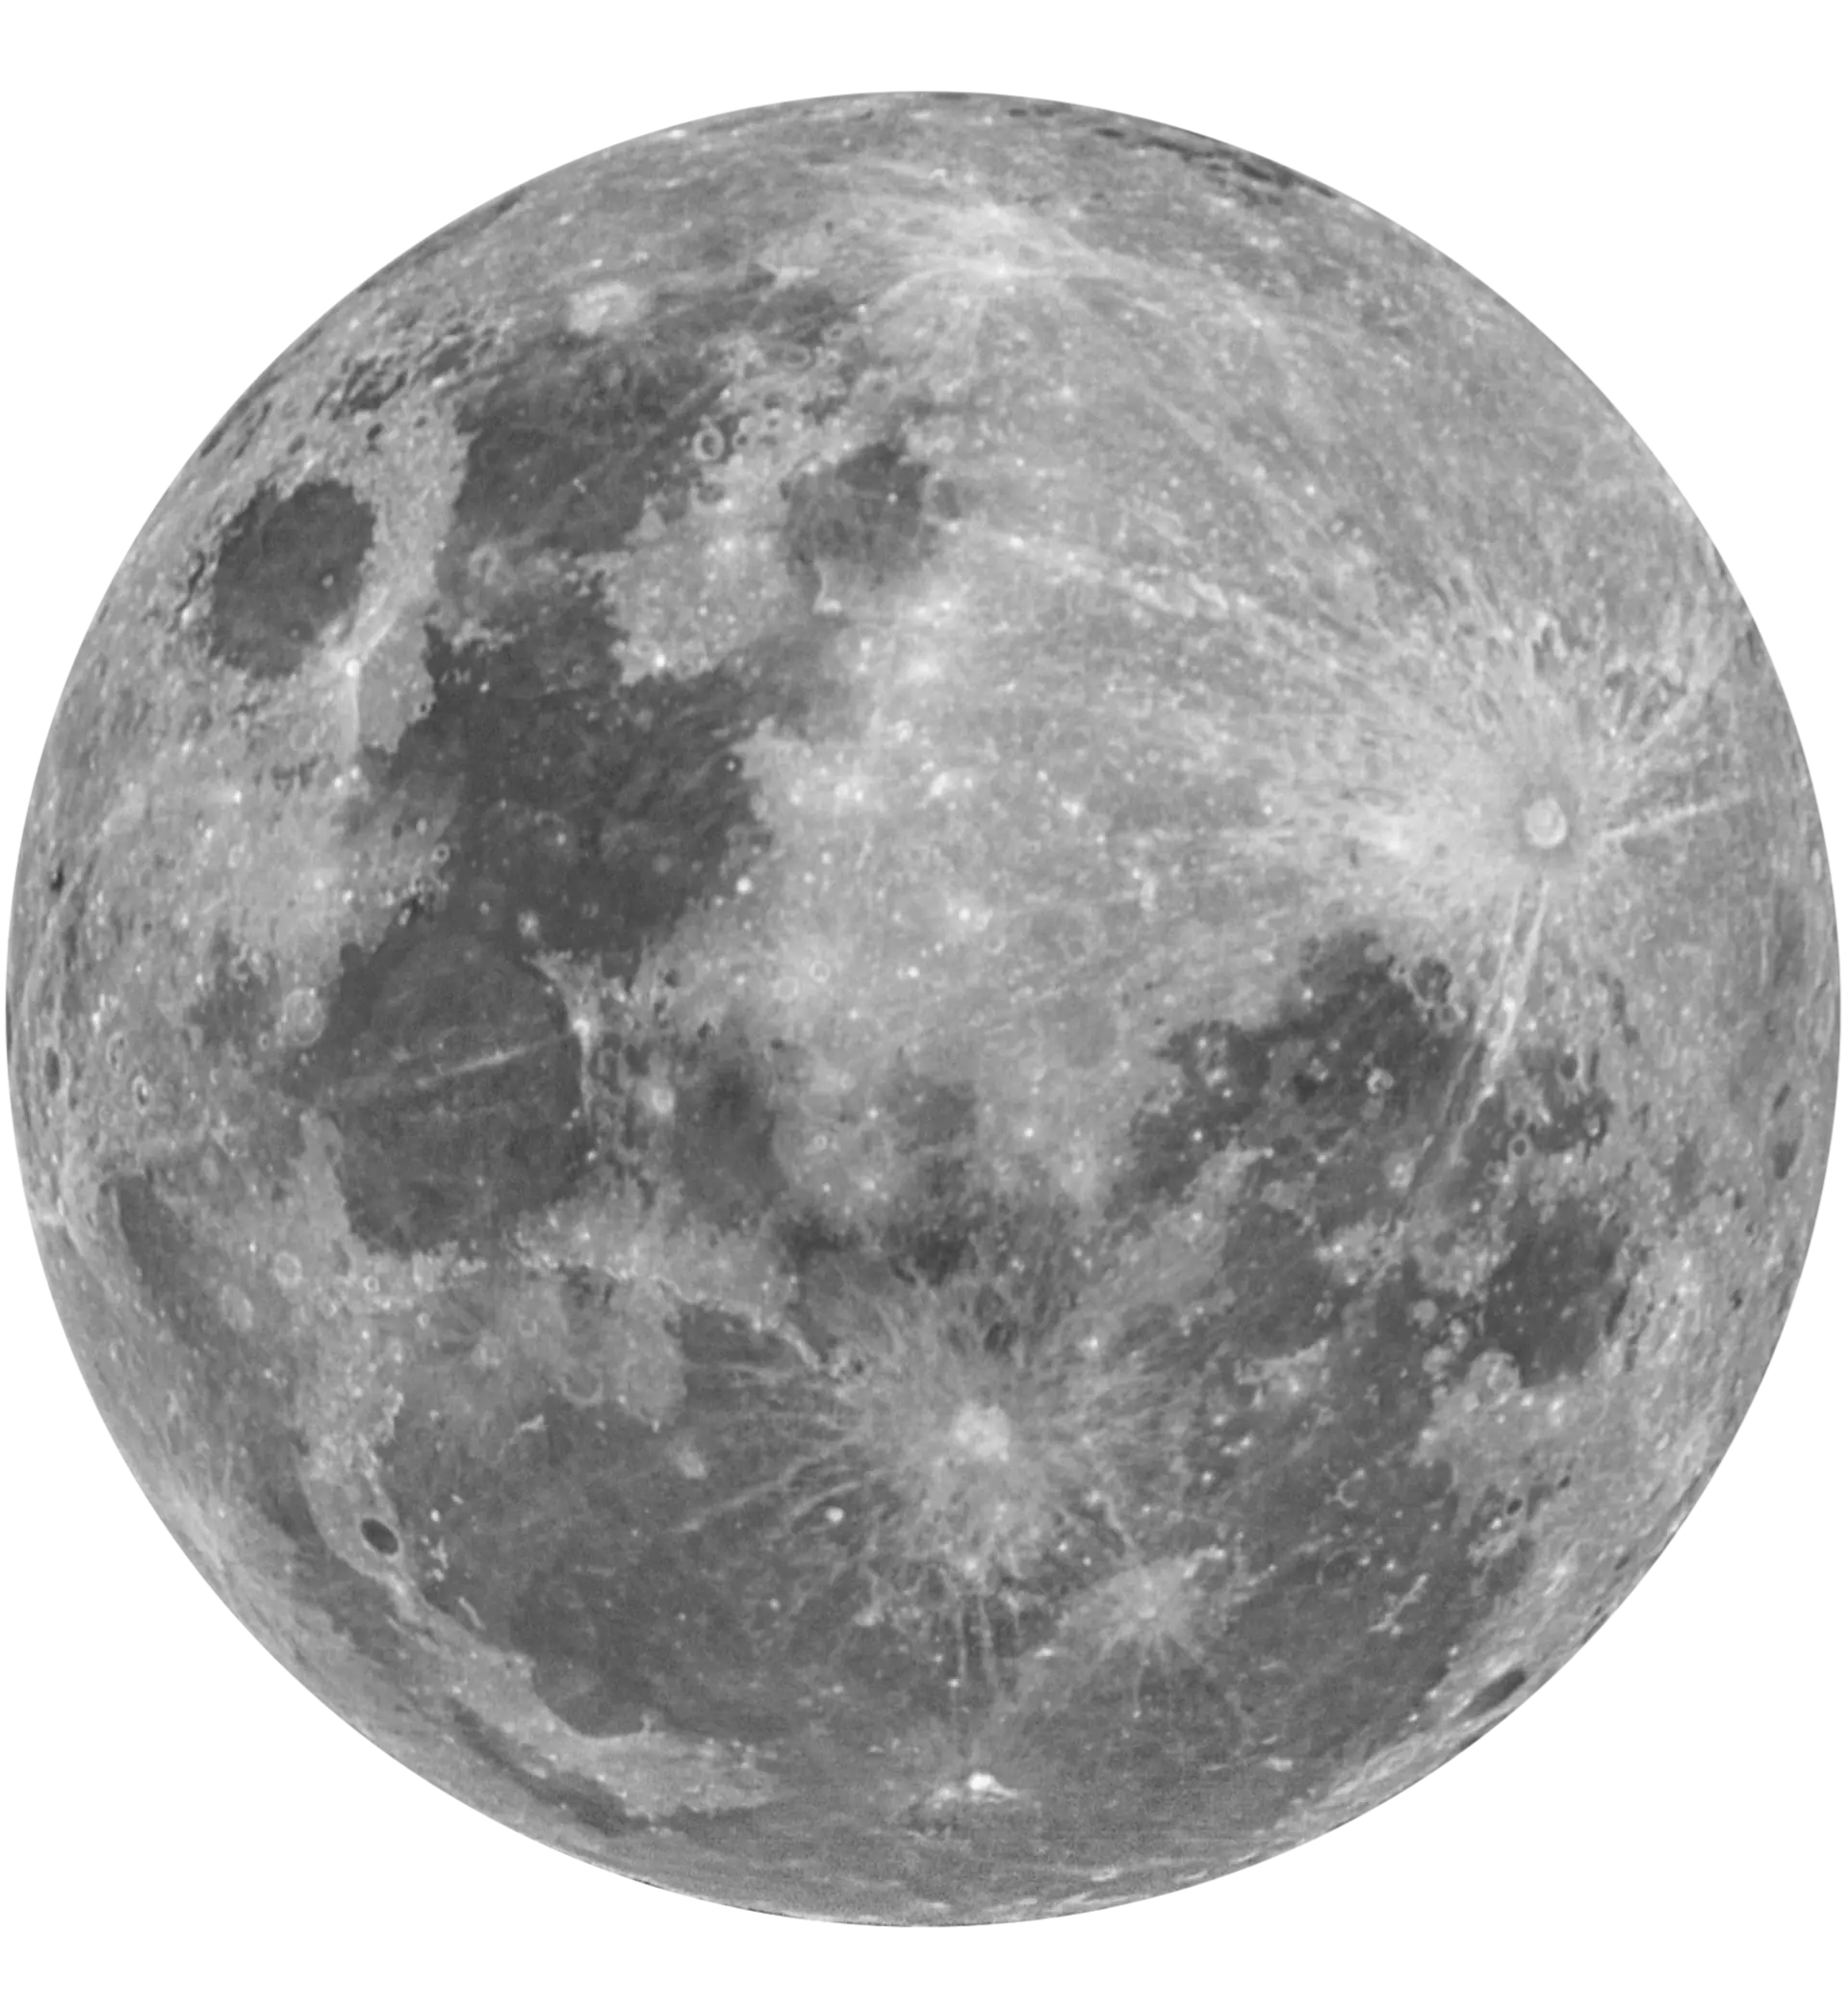 Large picture of the Moon